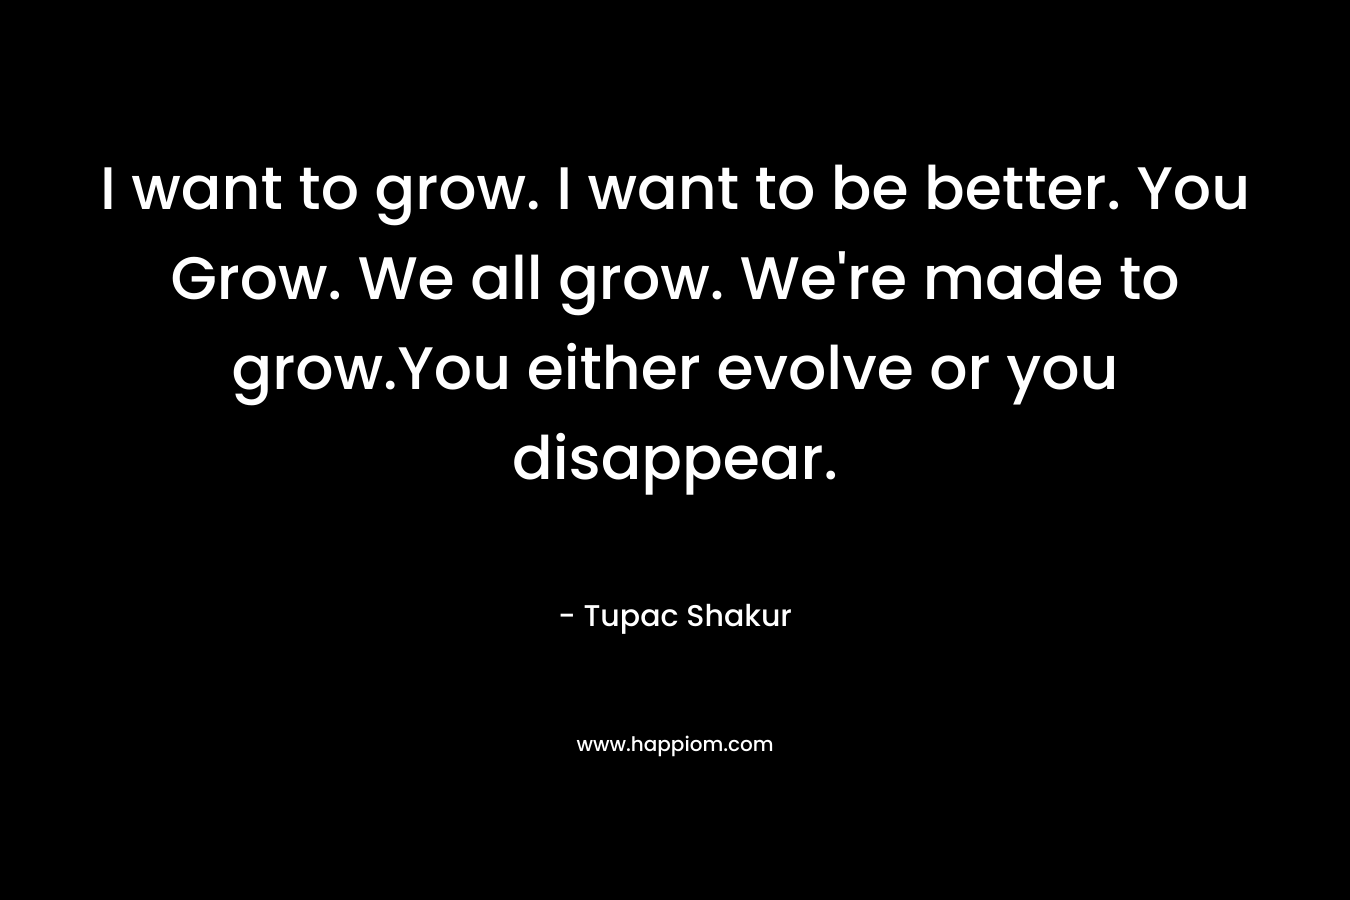 I want to grow. I want to be better. You Grow. We all grow. We’re made to grow.You either evolve or you disappear. – Tupac Shakur